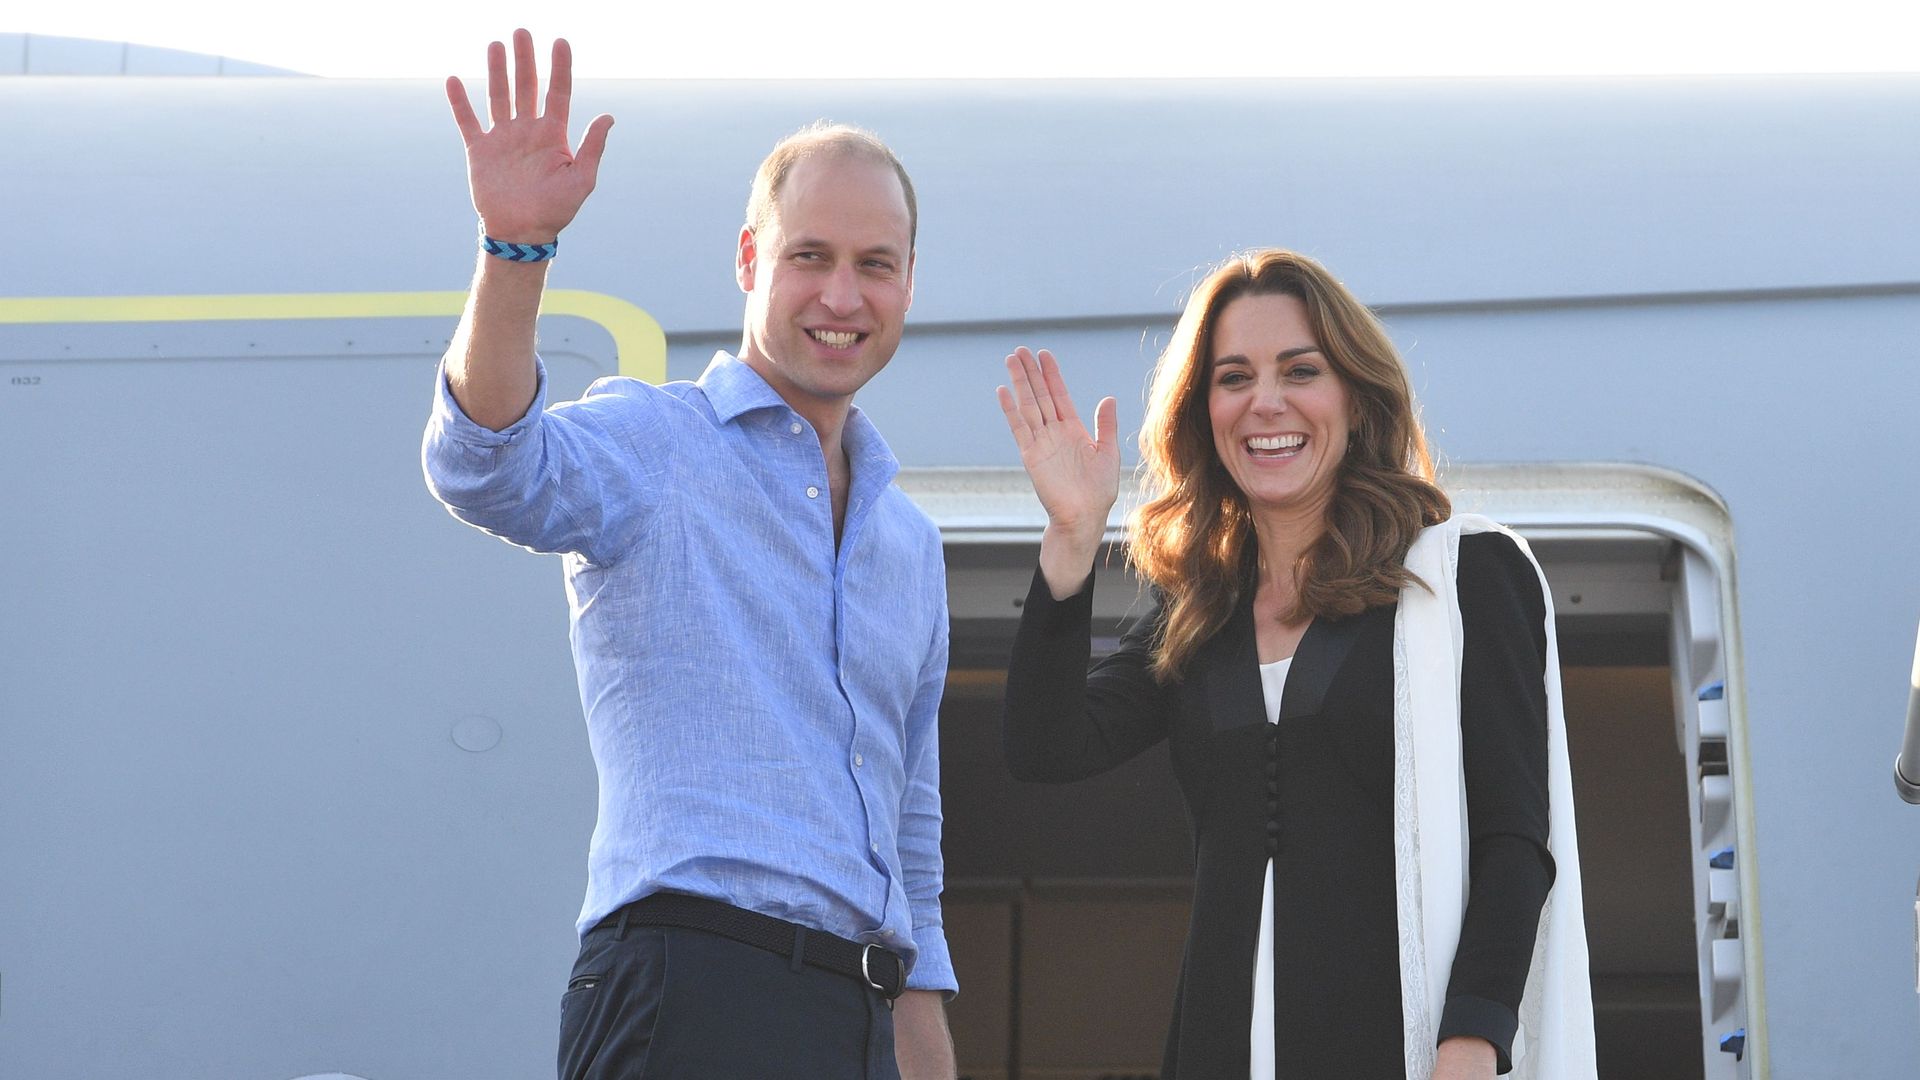 Prince William and Kate Middleton waving before entering an aeroplane